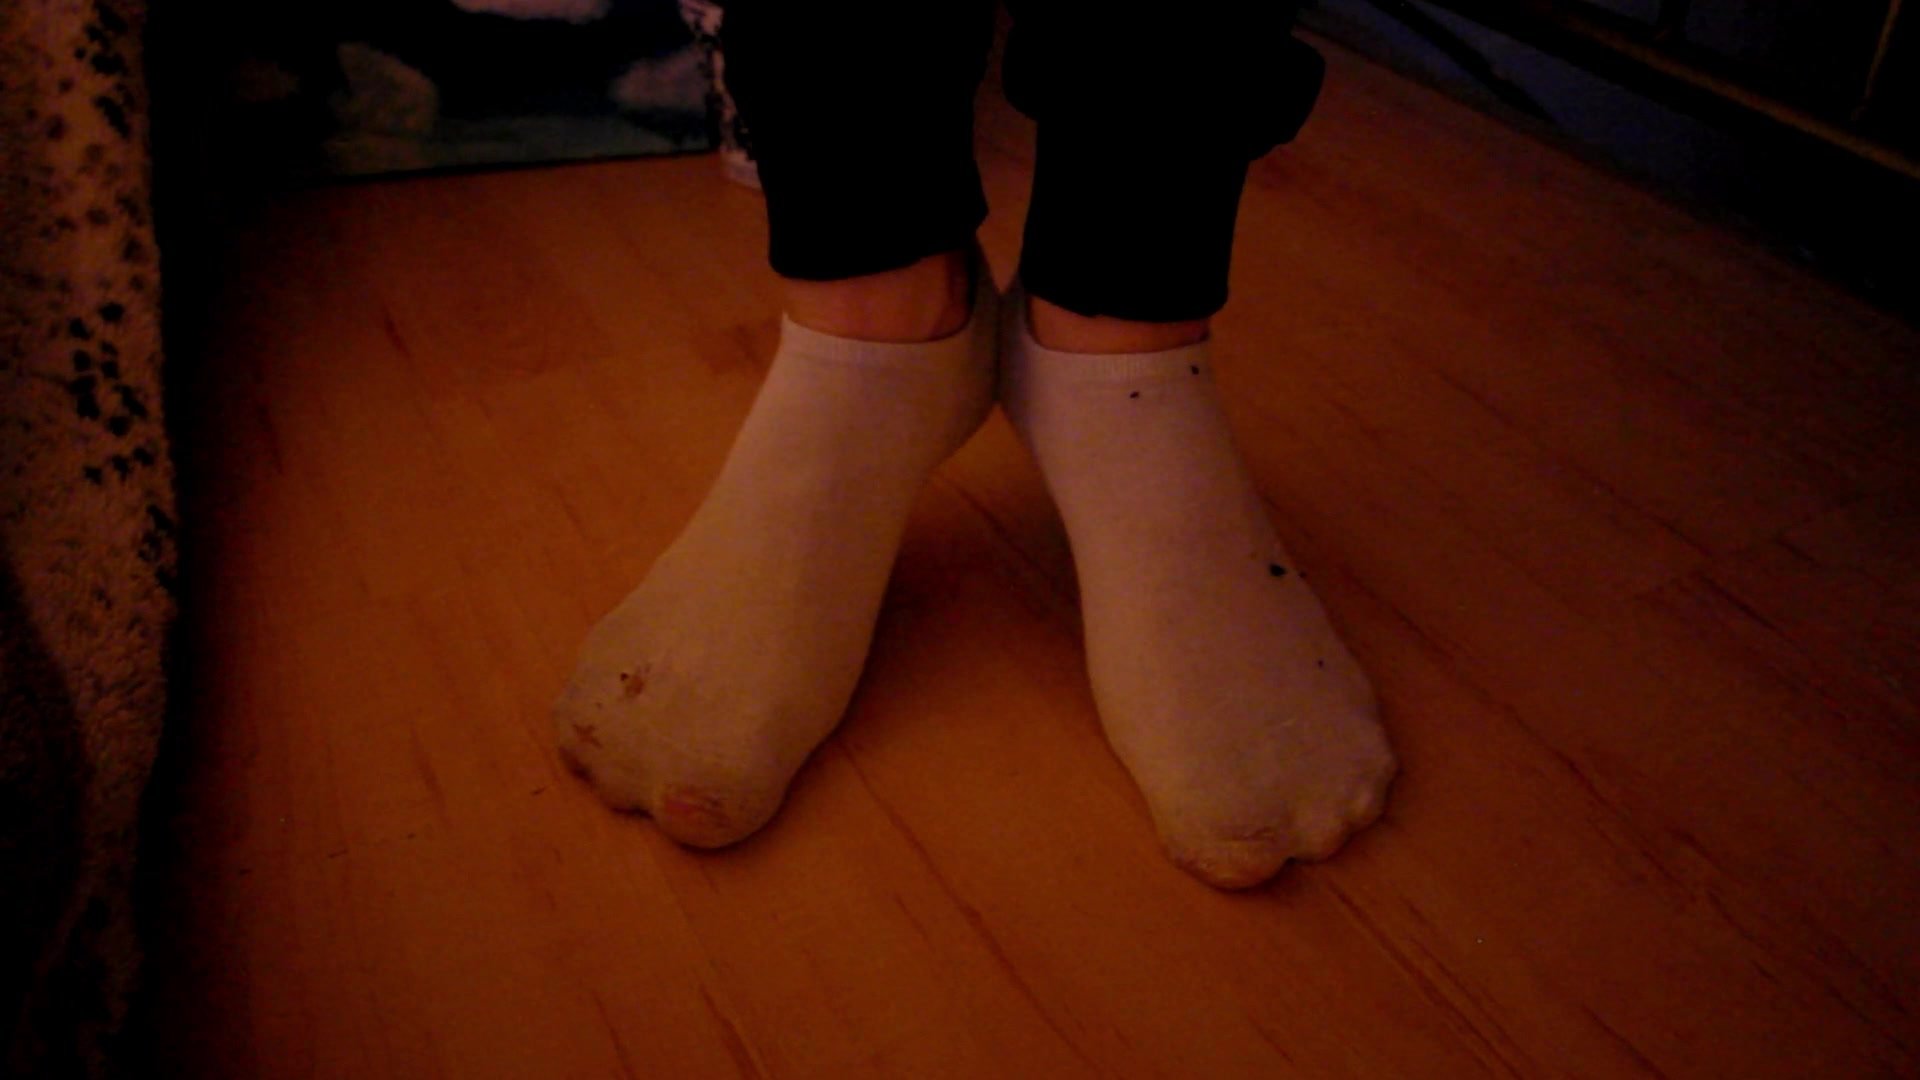 2 days unwashed male boy feet ^^ and sock trample!